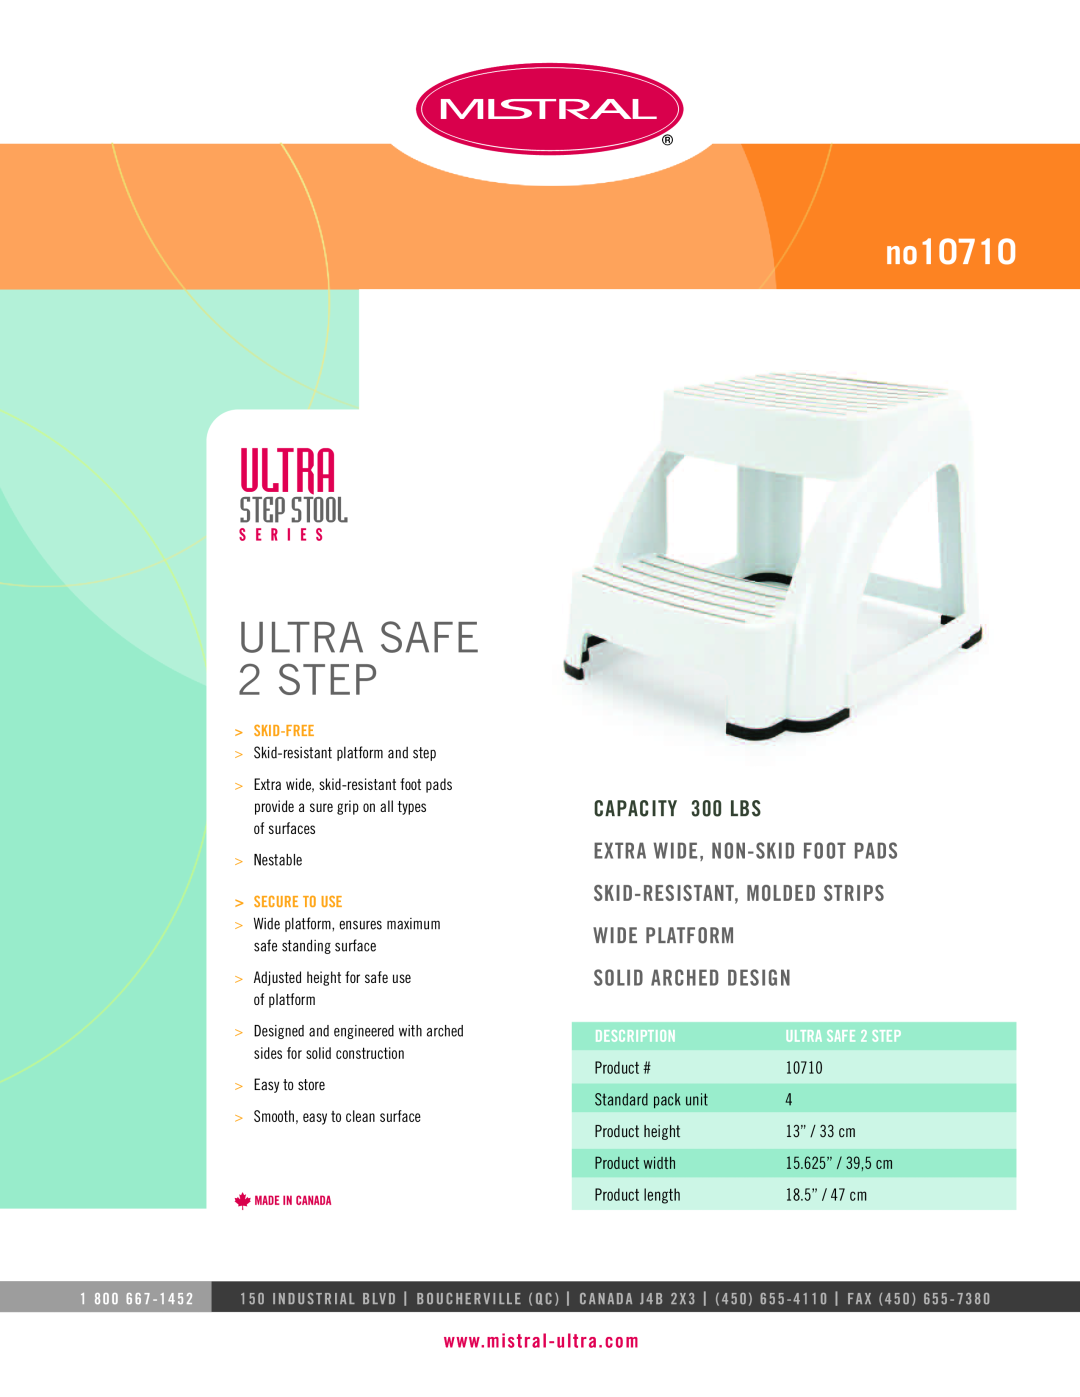 Mistral manual Ultra, ULTRA SAFE 2STEP, Step Stool, no10710, CAPACITY 300 LBS, Extra Wide, Non-Skidfoot Pads 